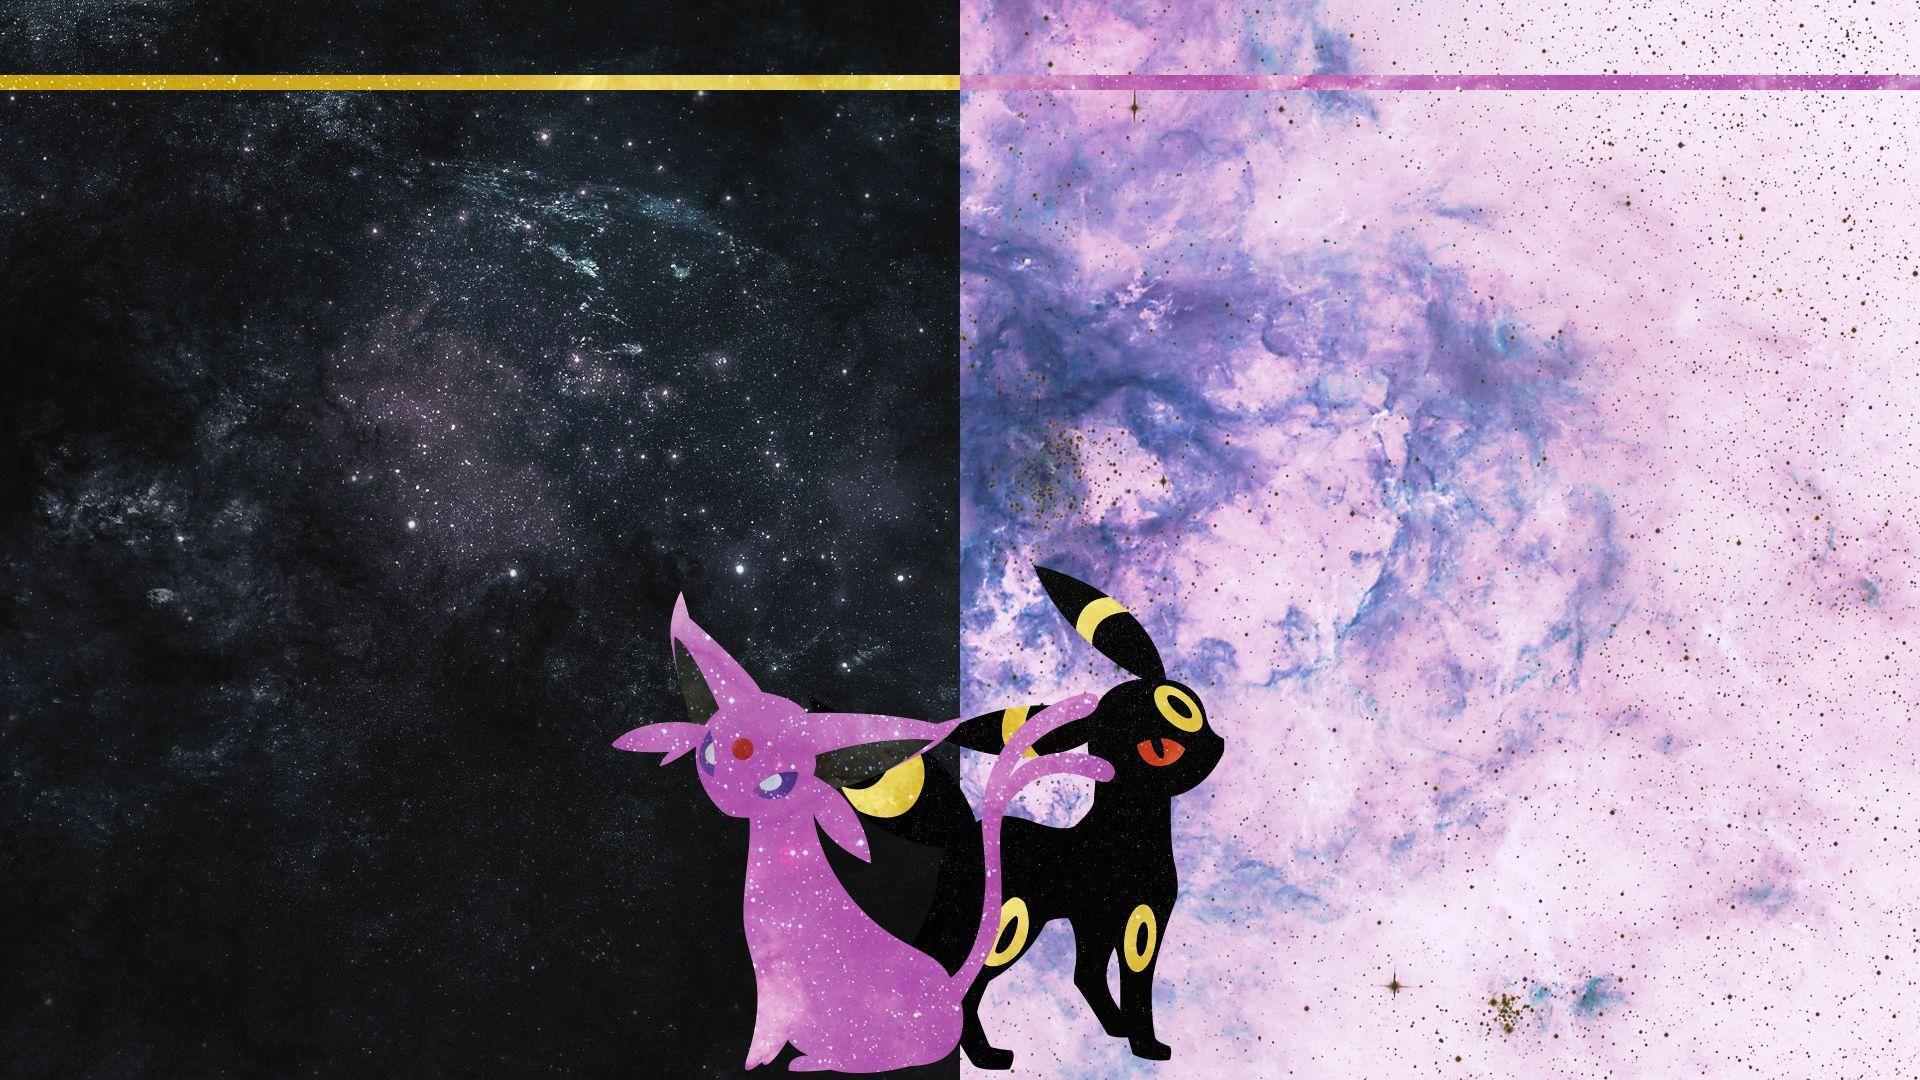 Espeon and Umbreon Desktop by DrBoxHead. Artworks